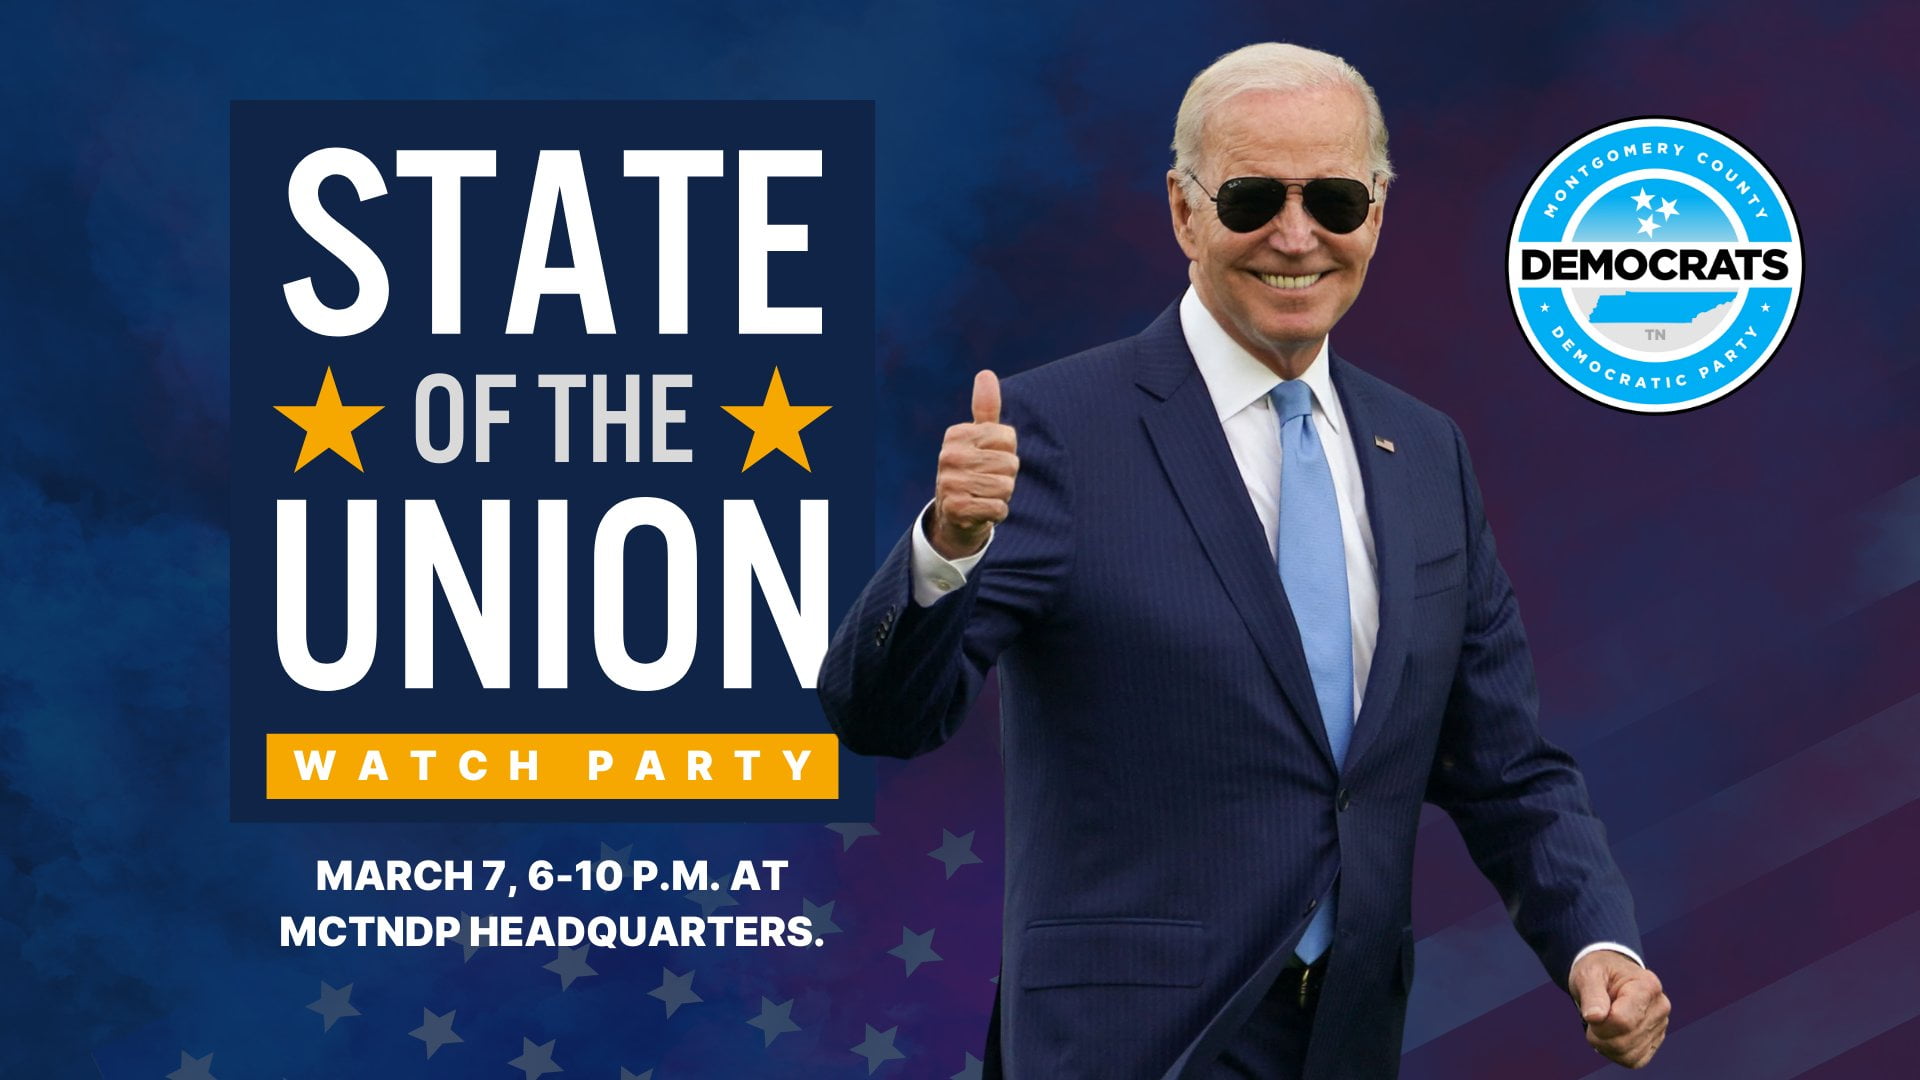 State of the Union Watch Party, March 7th from 6-10PM